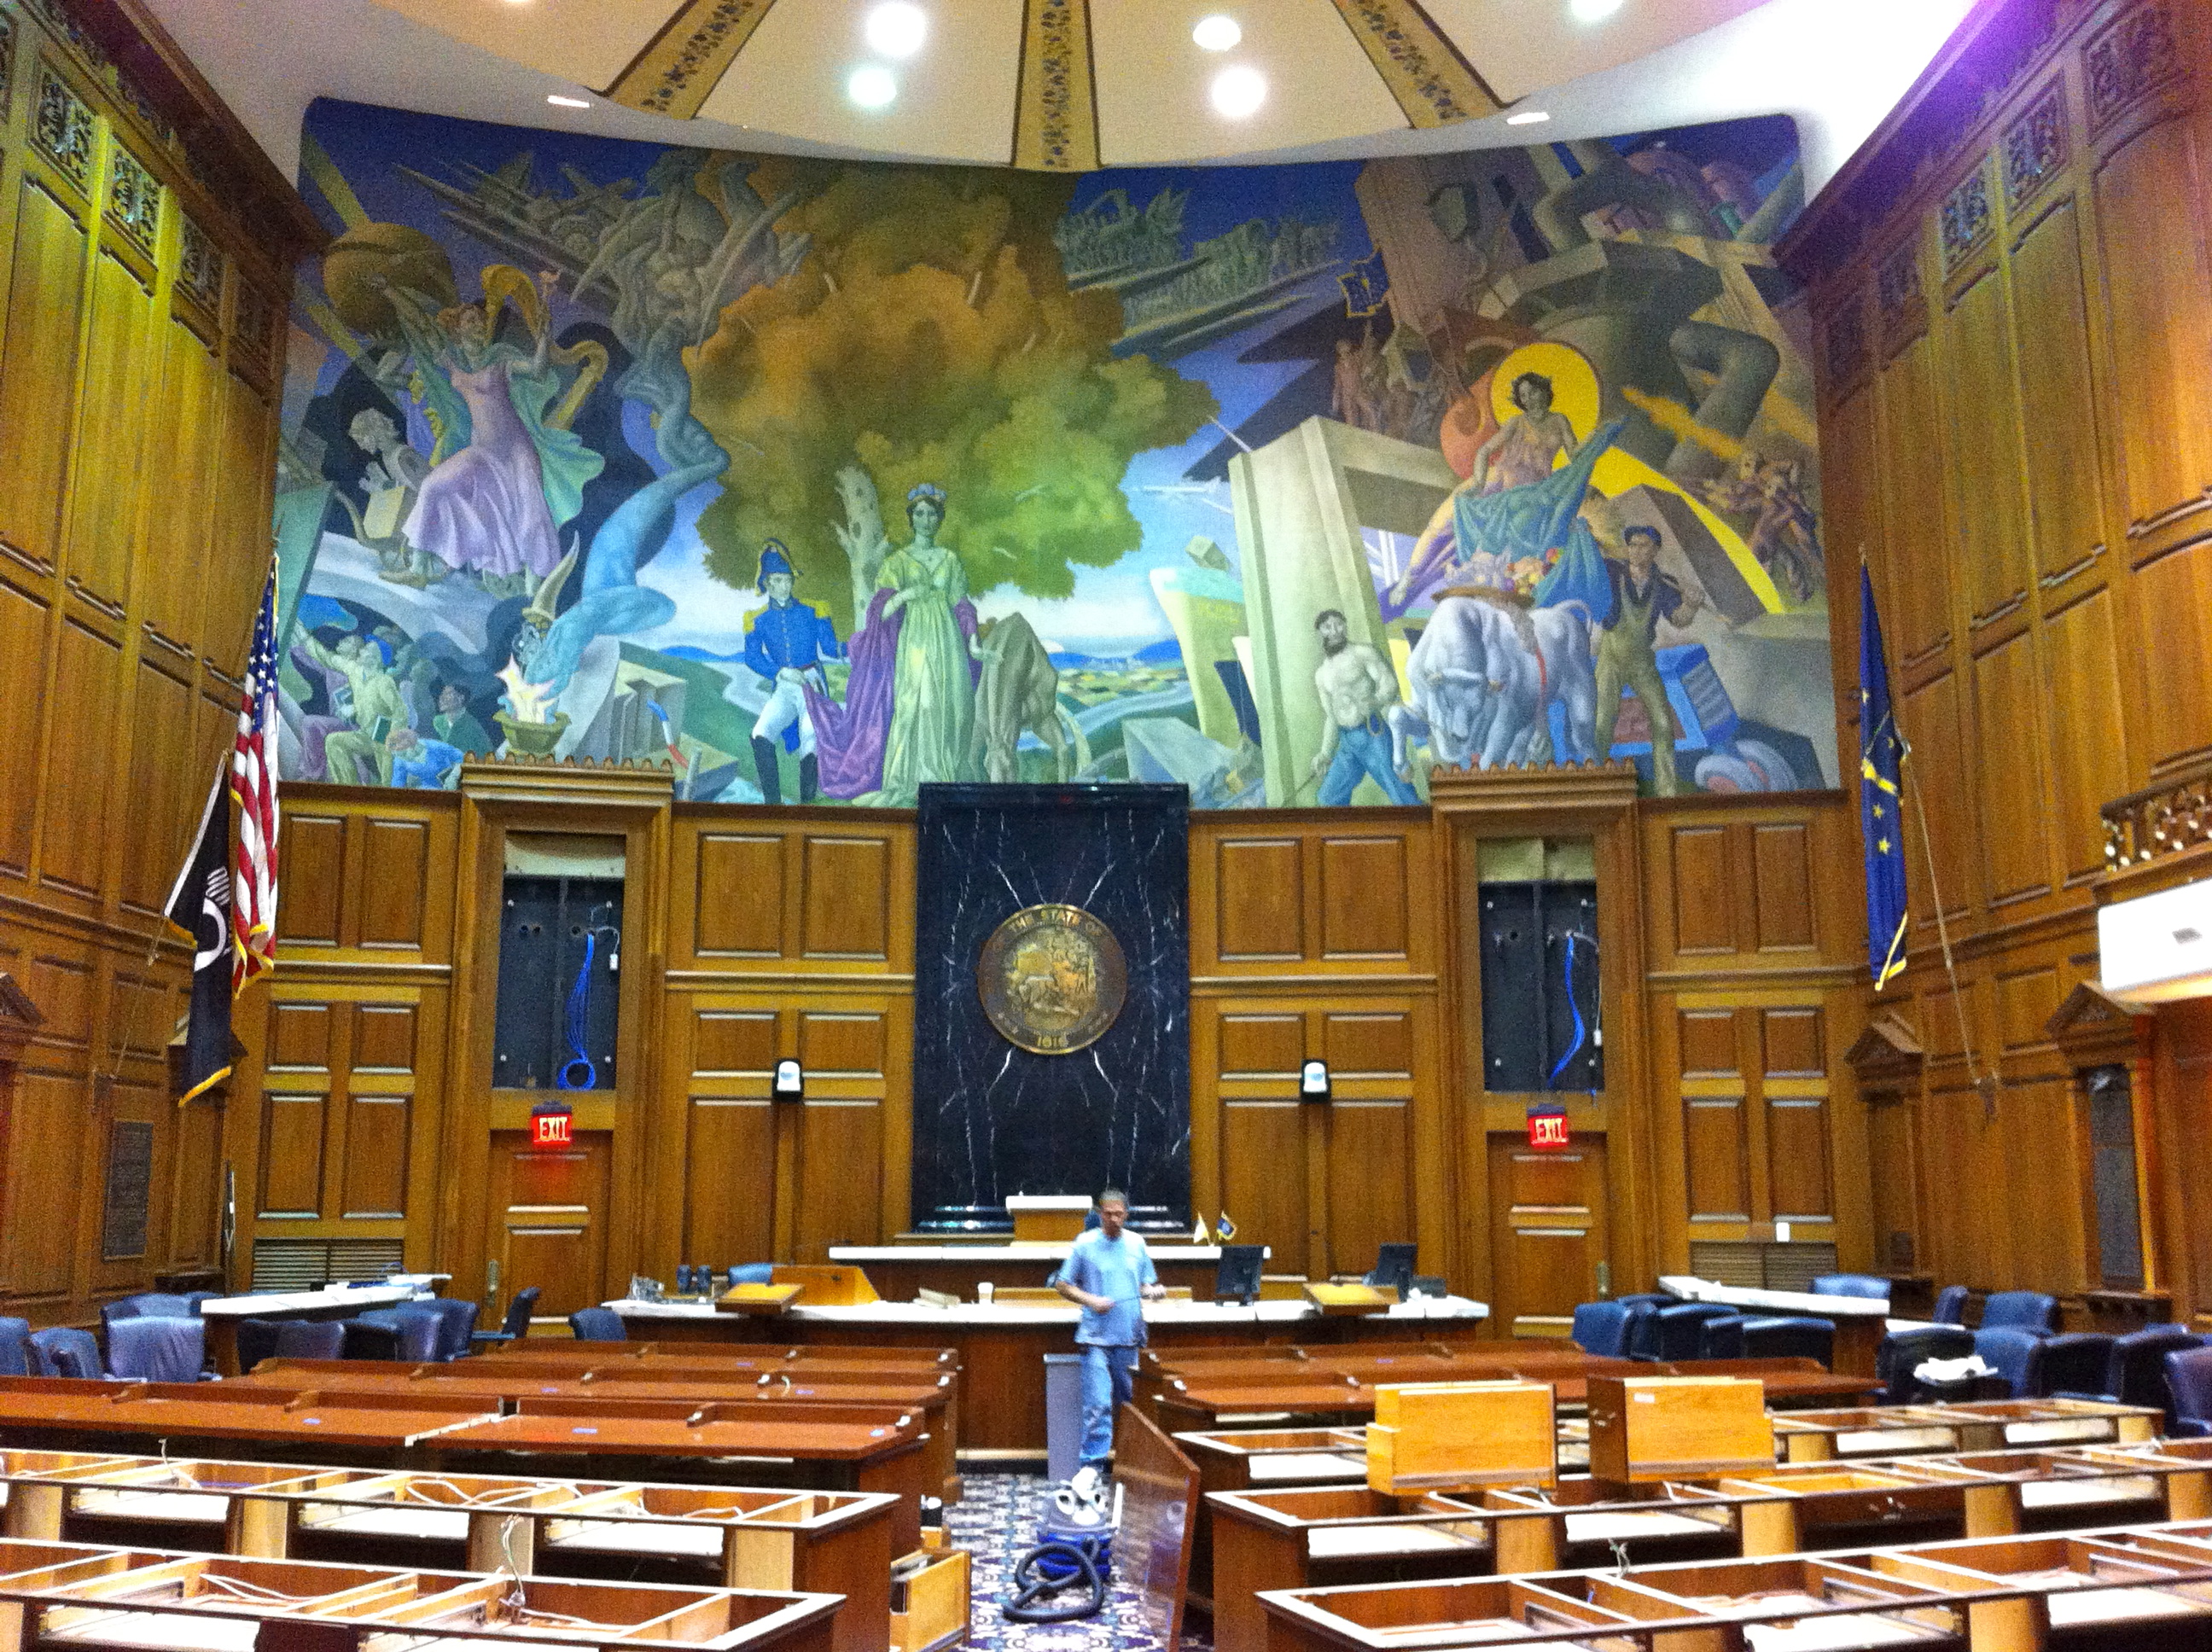 The Senate Chamber in the Indiana State Capitol in Indianapolis